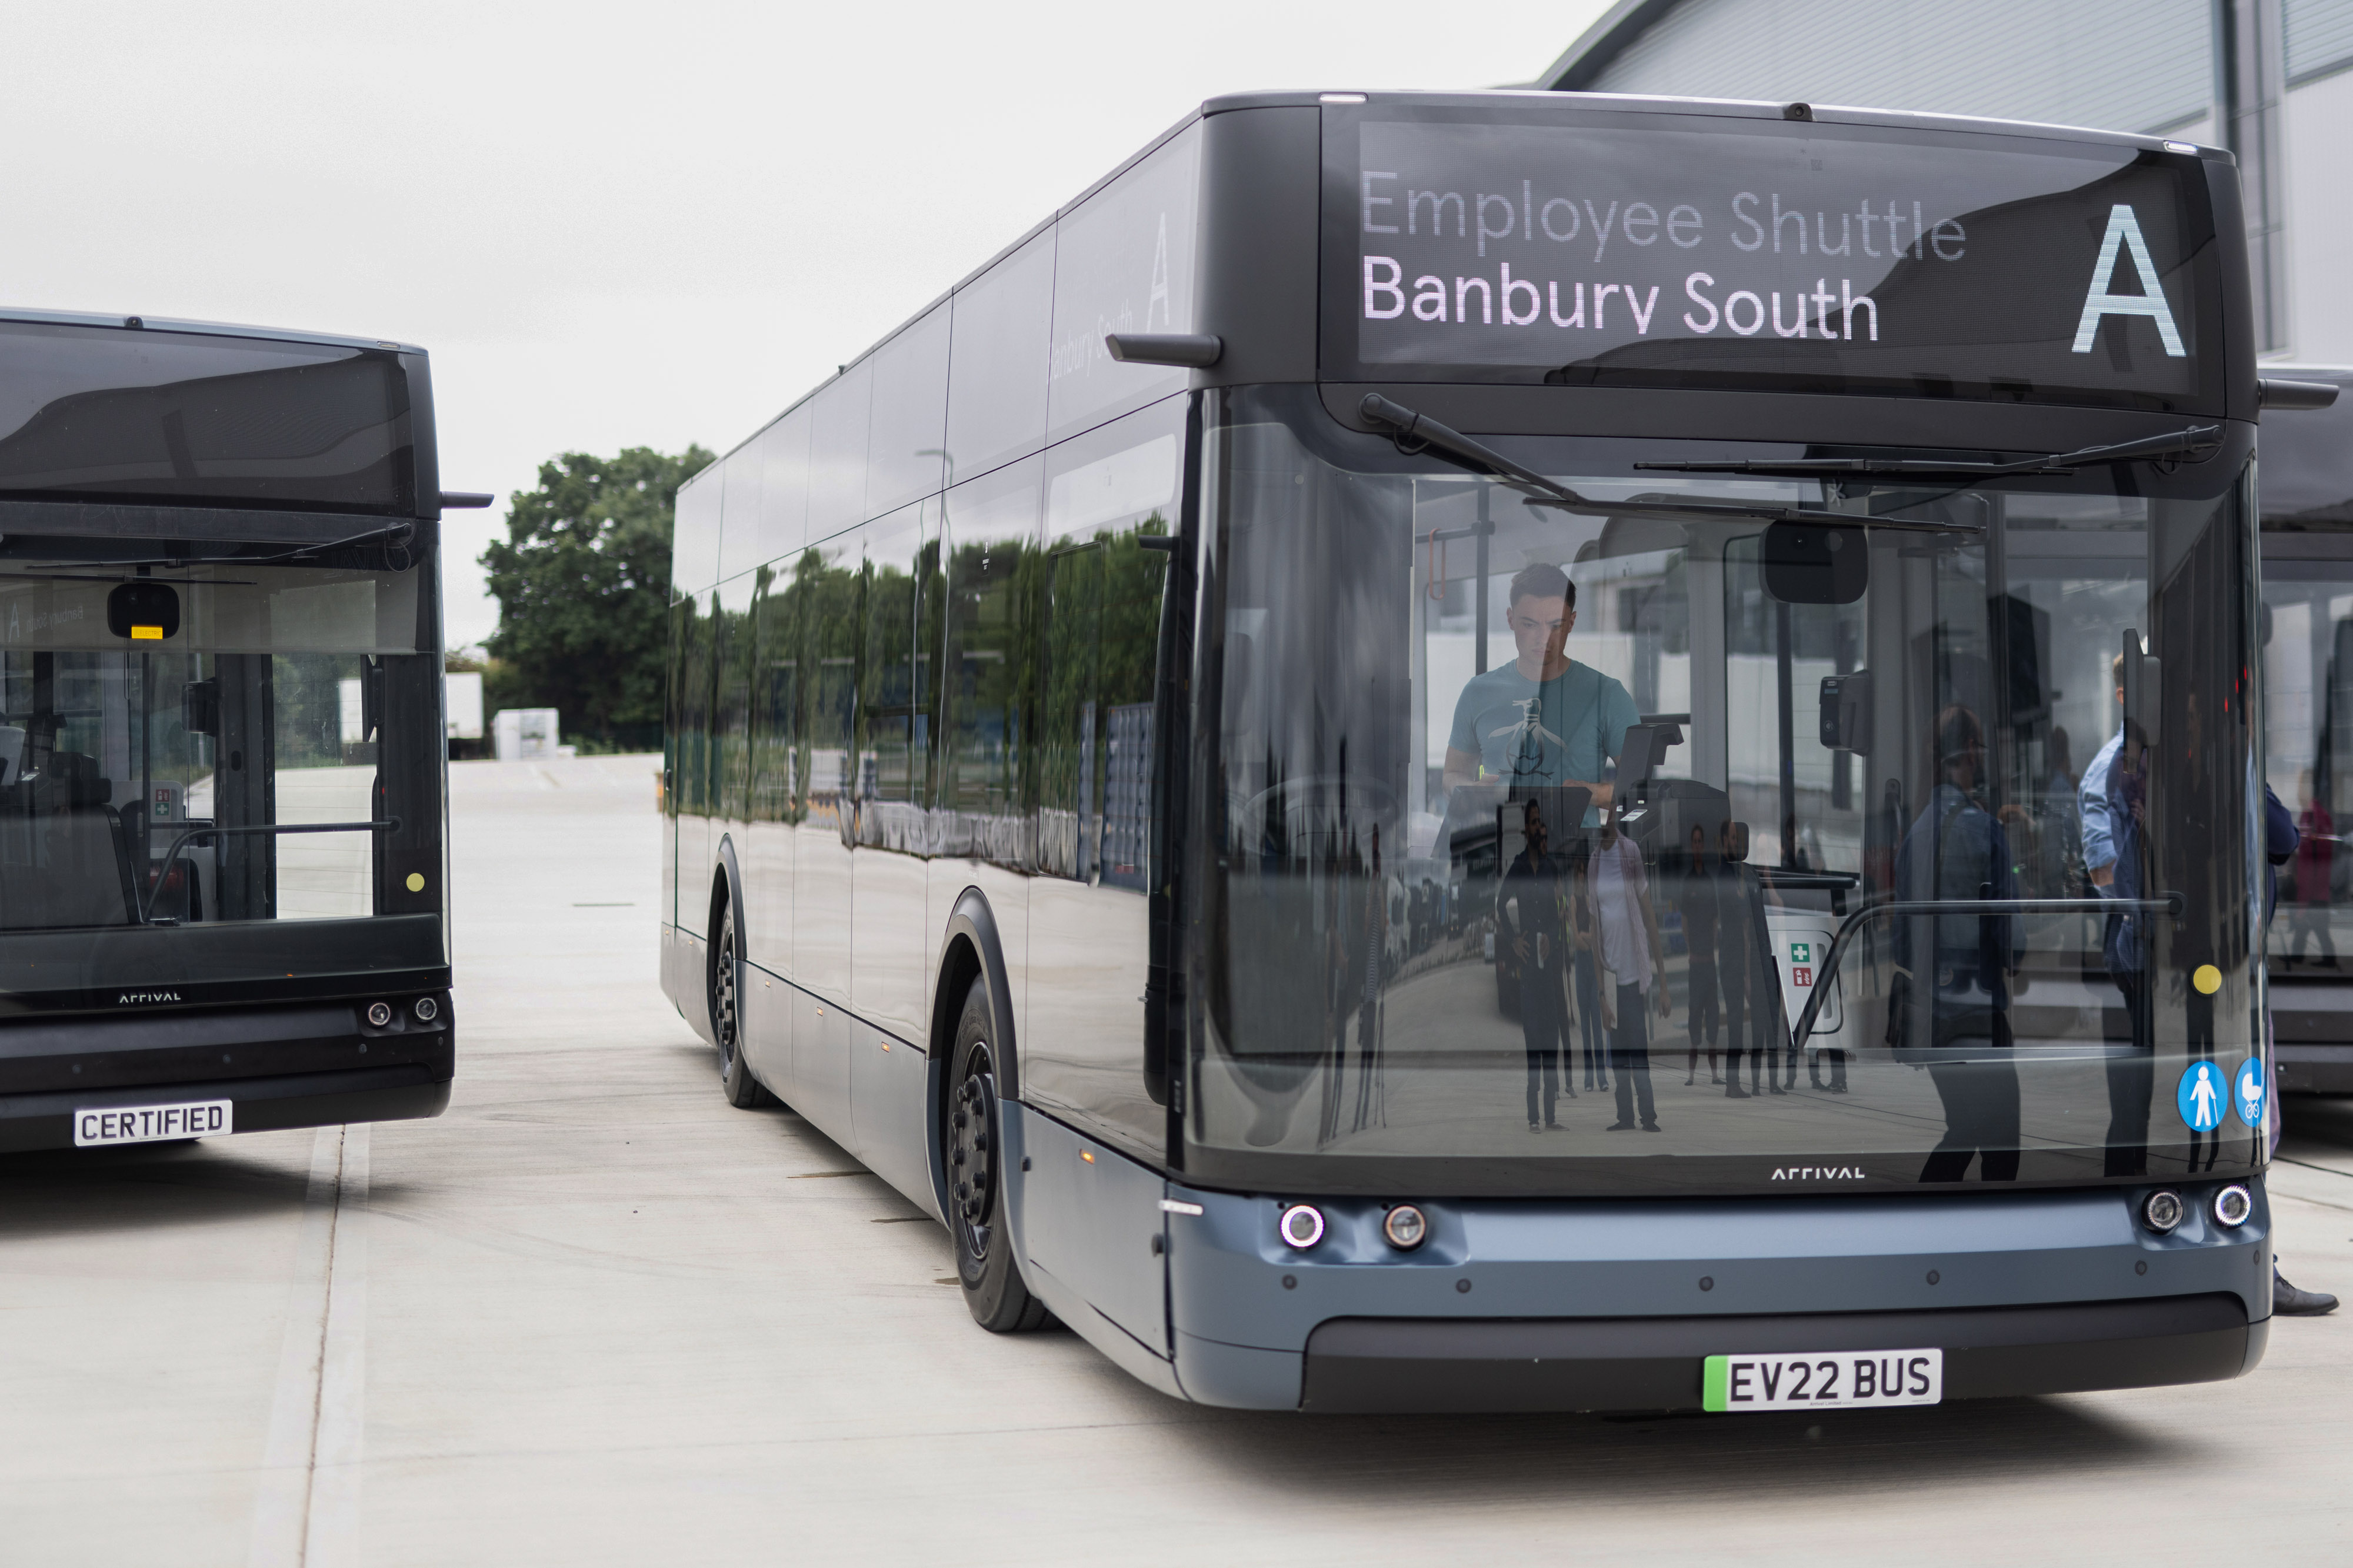 A prototype electric bus at Arrival’s research and development facility in Banbury, northwest of London, on Aug. 23.